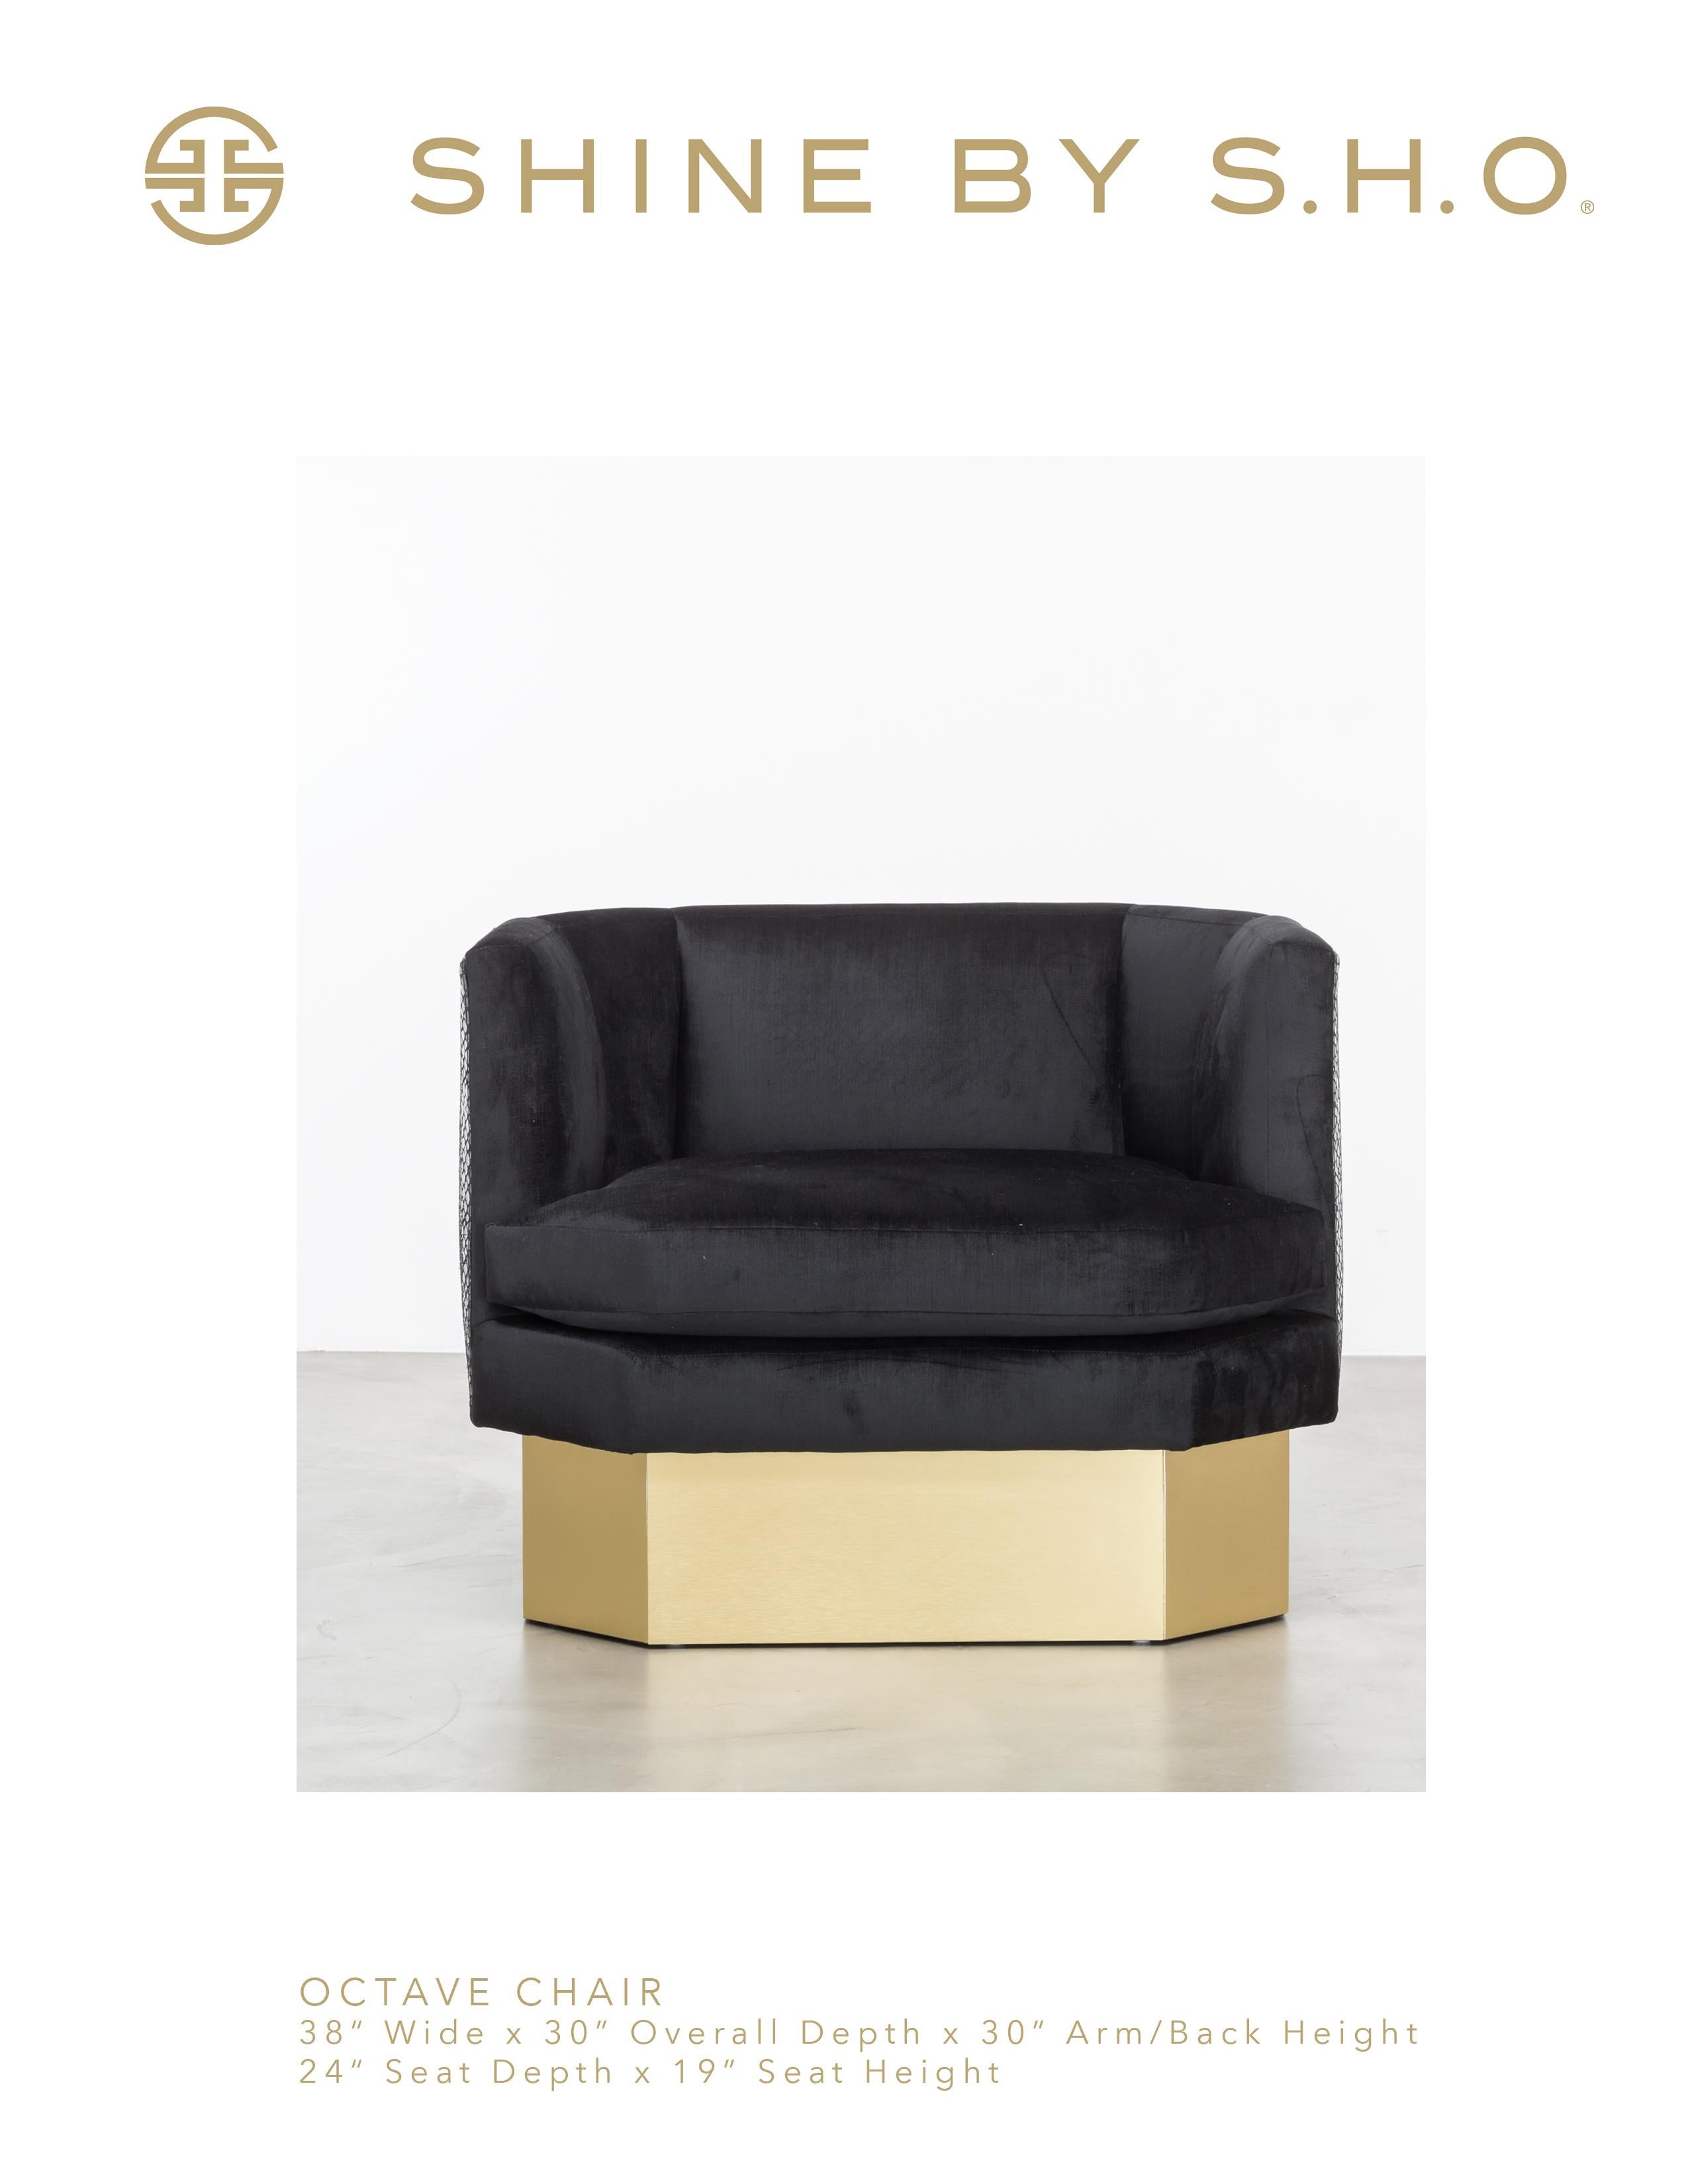 OCTAVE CHAIR- Modern Lounge Chair in Black Velvet In New Condition For Sale In Laguna Niguel, CA